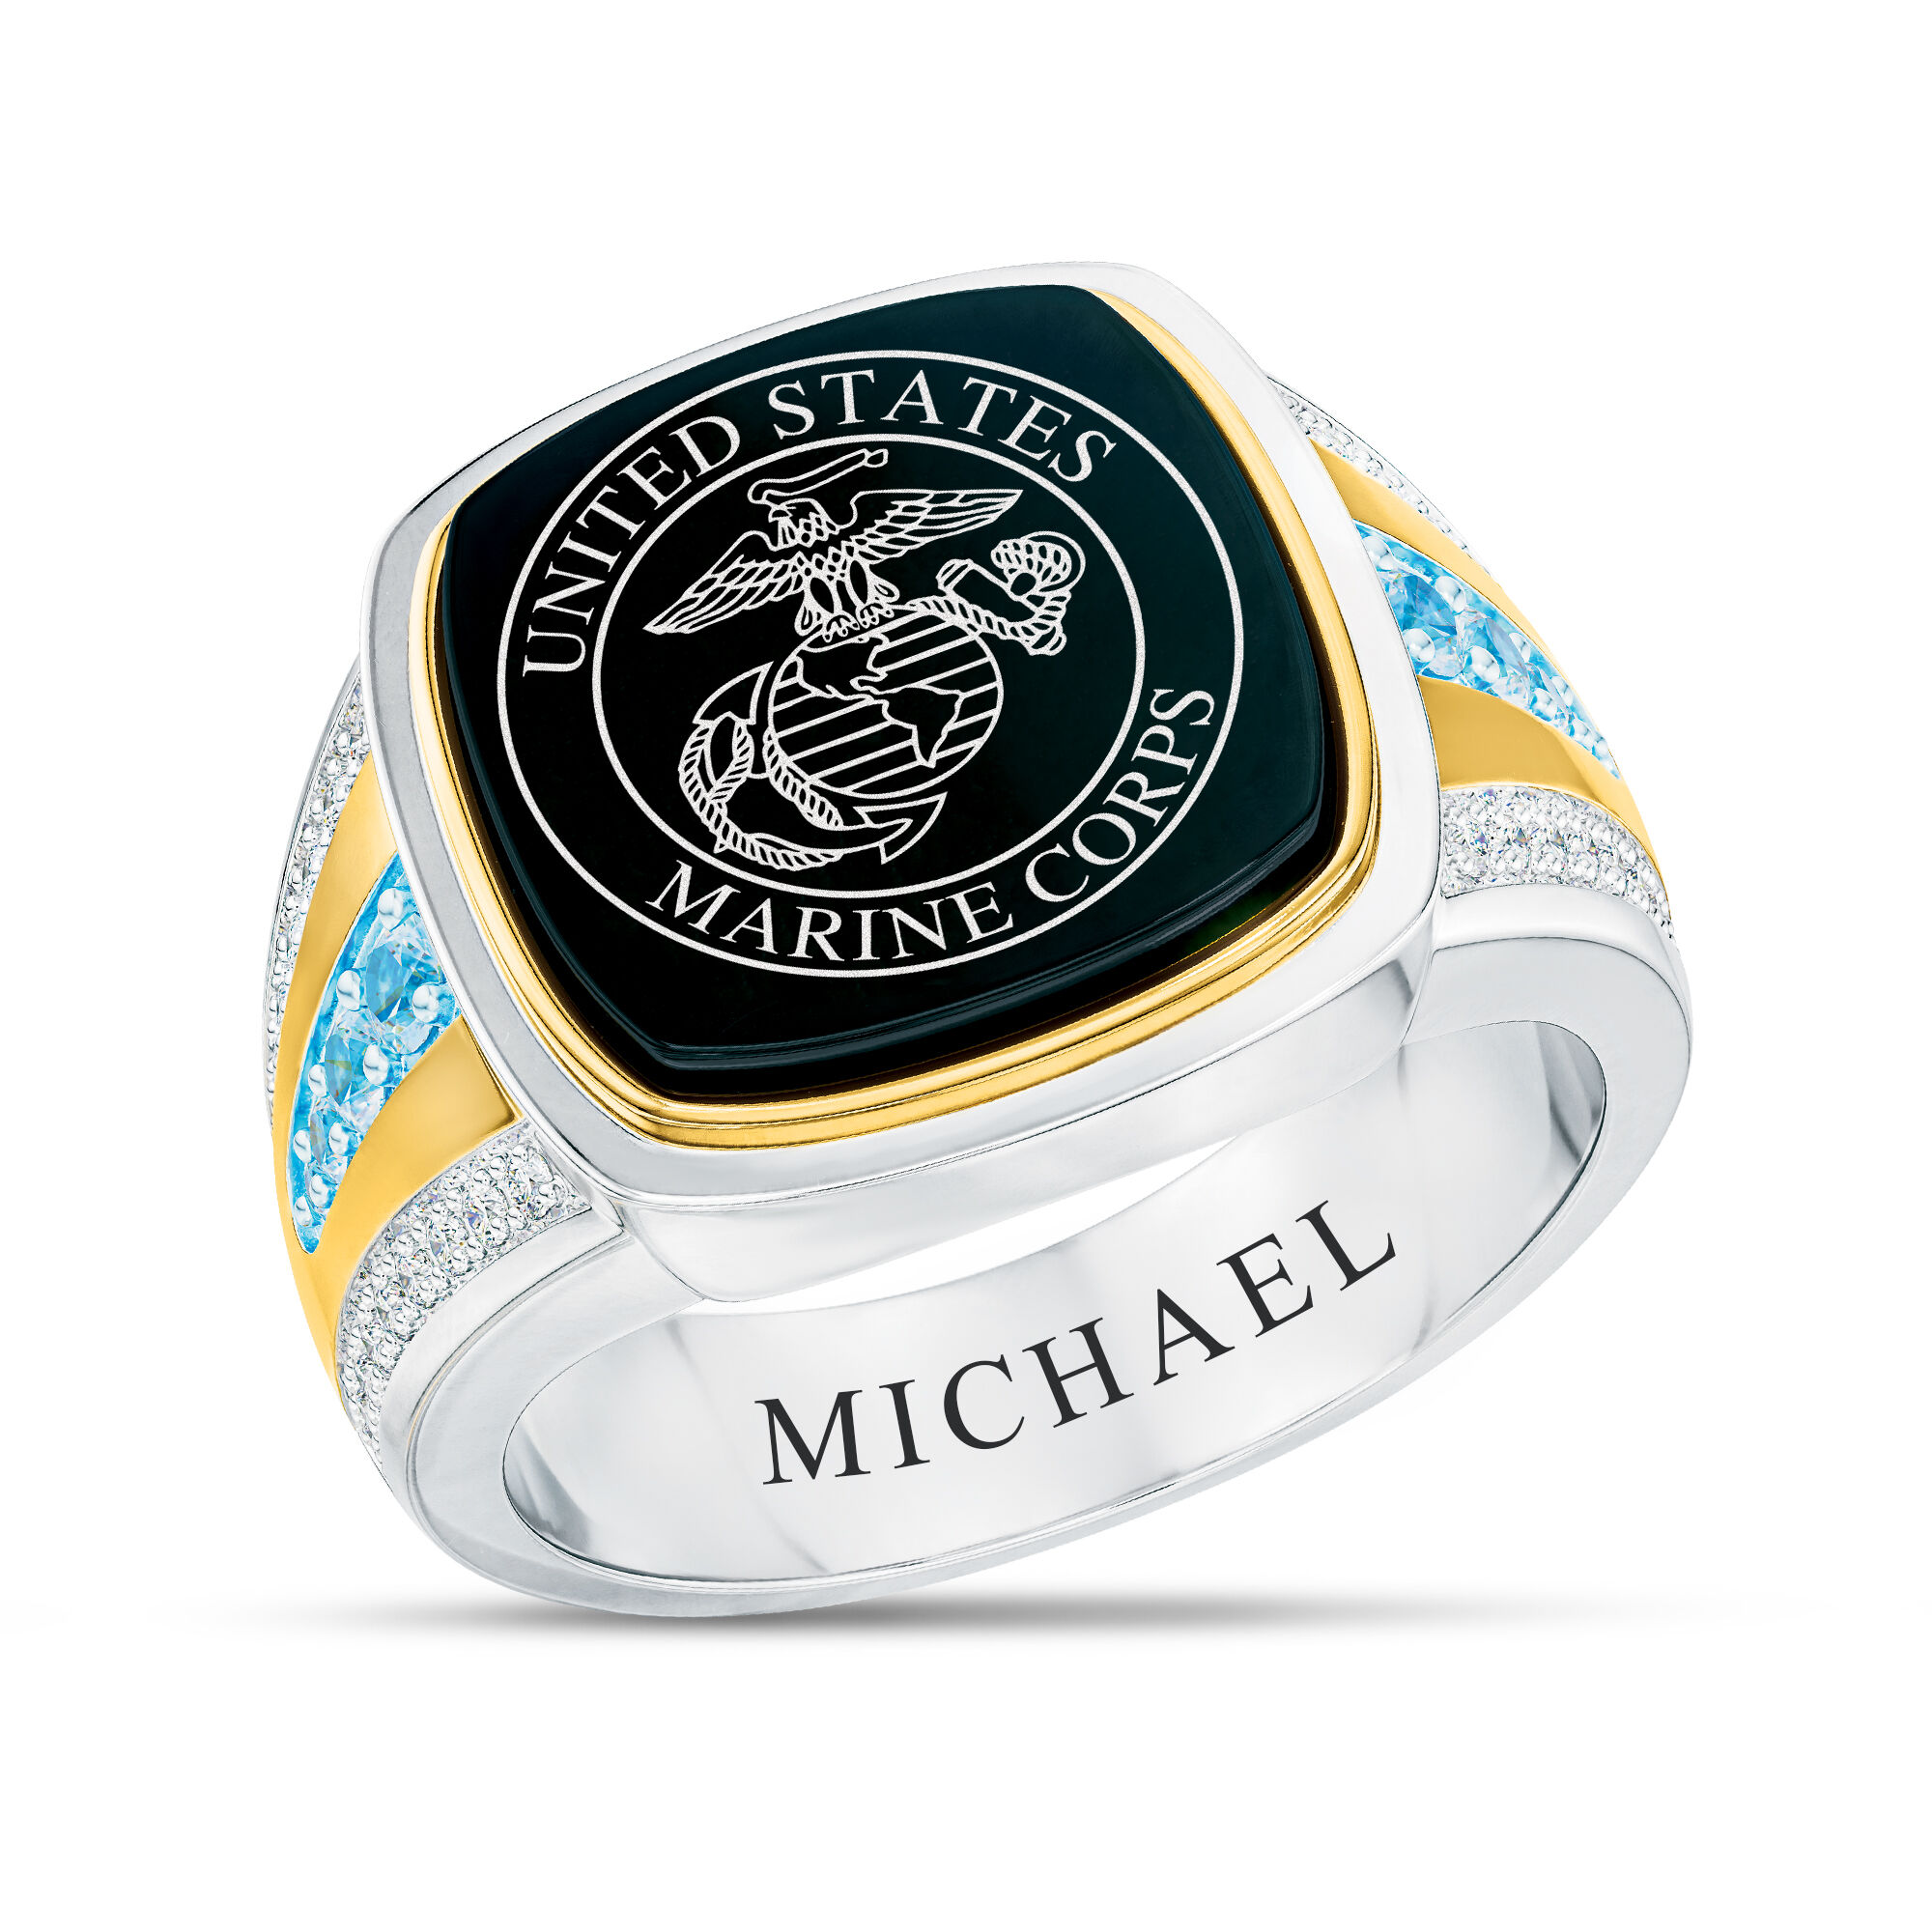 The US Marines Birthstone Ring 10347 0035 c march